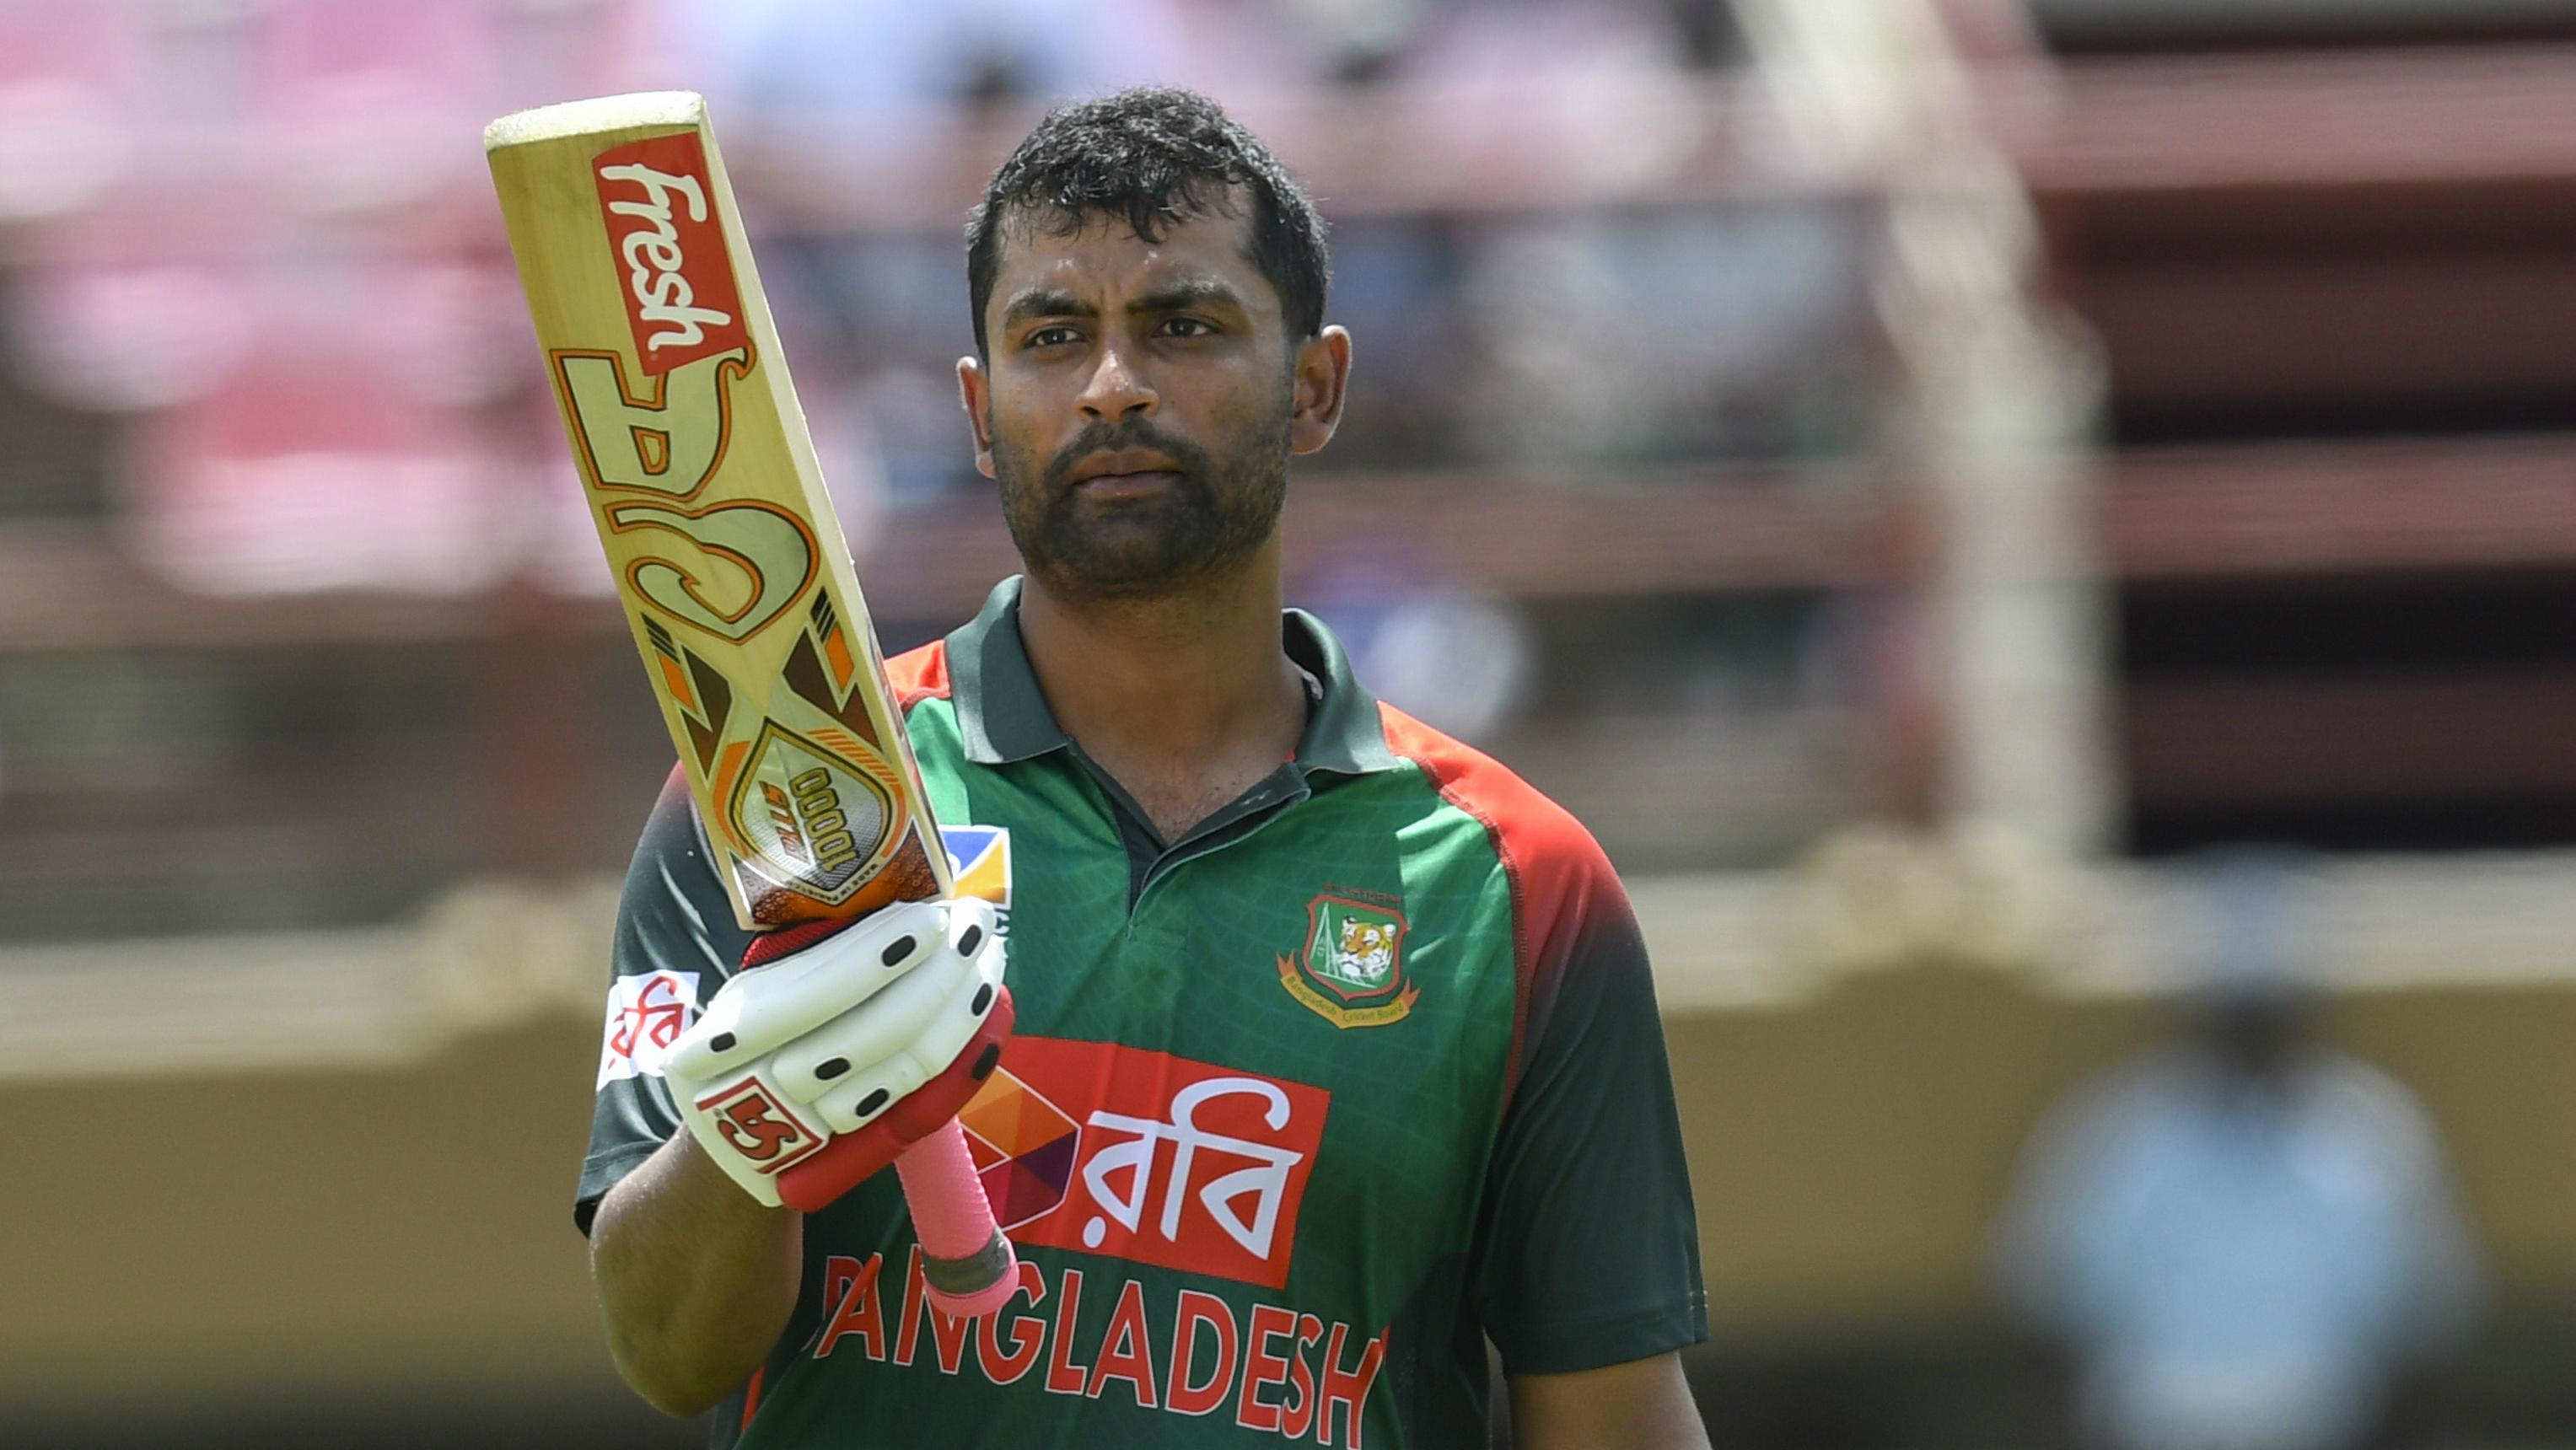 Everyone was hungry to win: Tamim